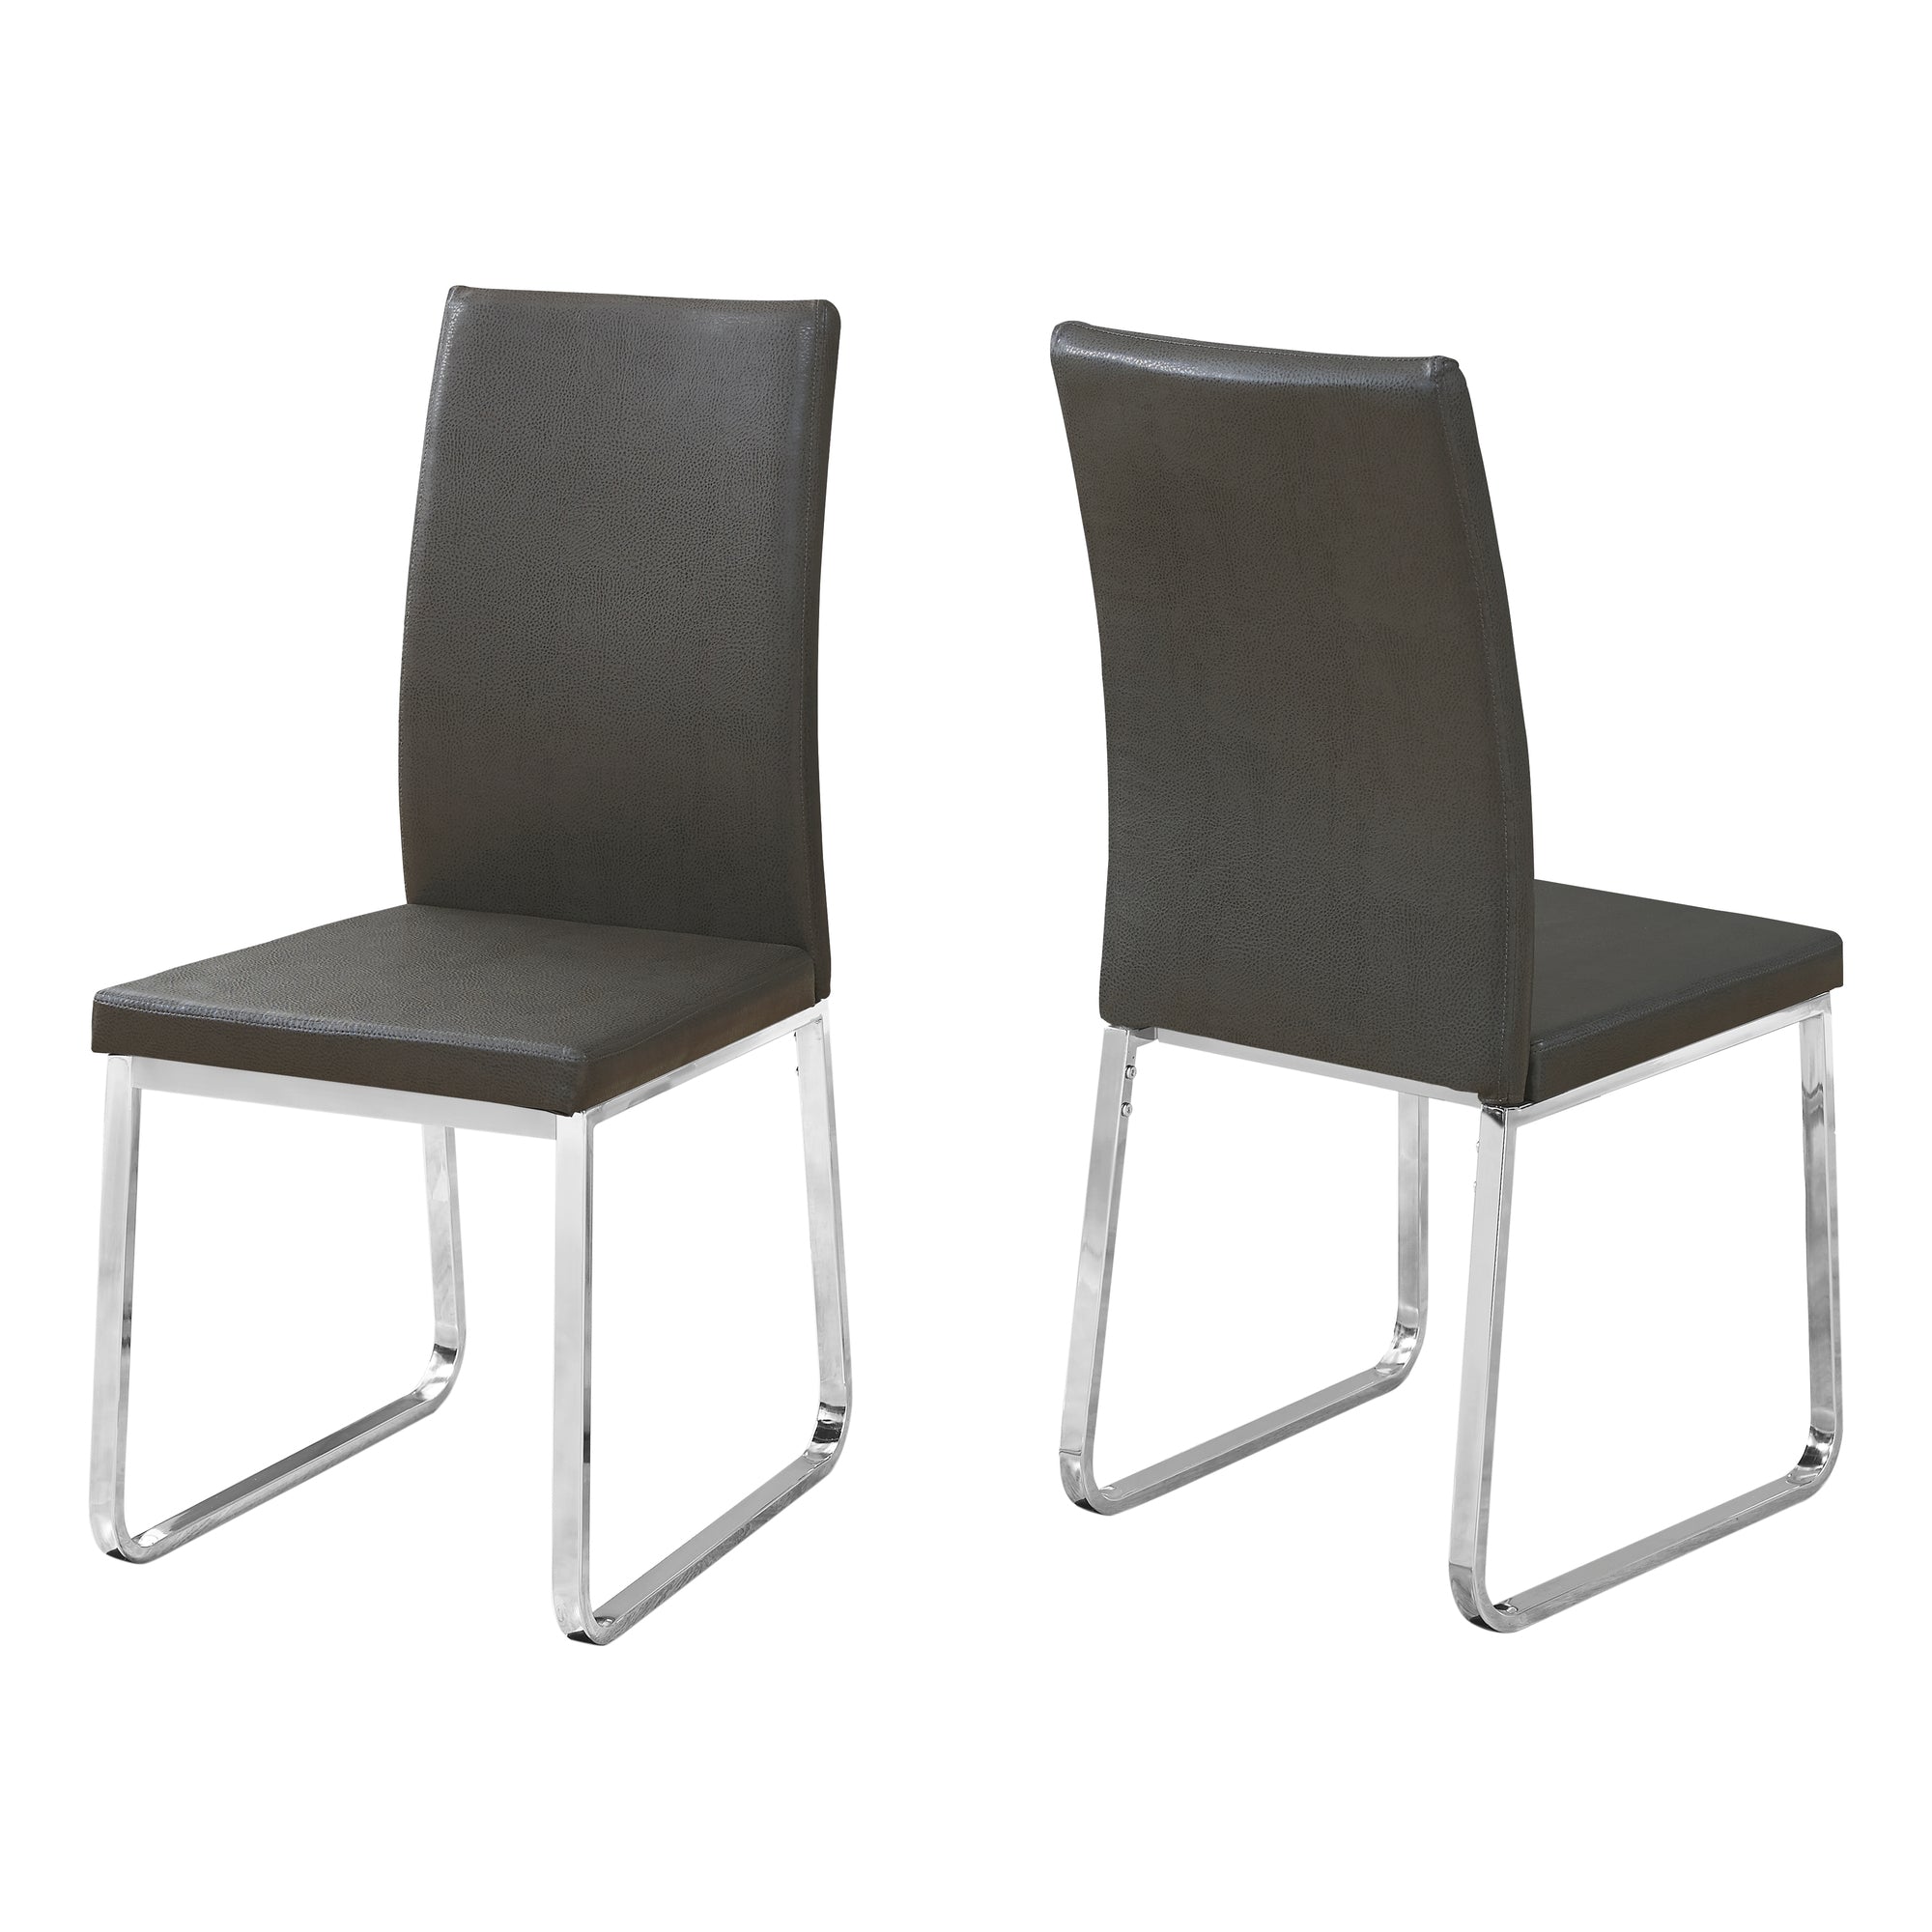 Dining Chair - 2Pcs / 38H / Grey Leather-Look / Chrome